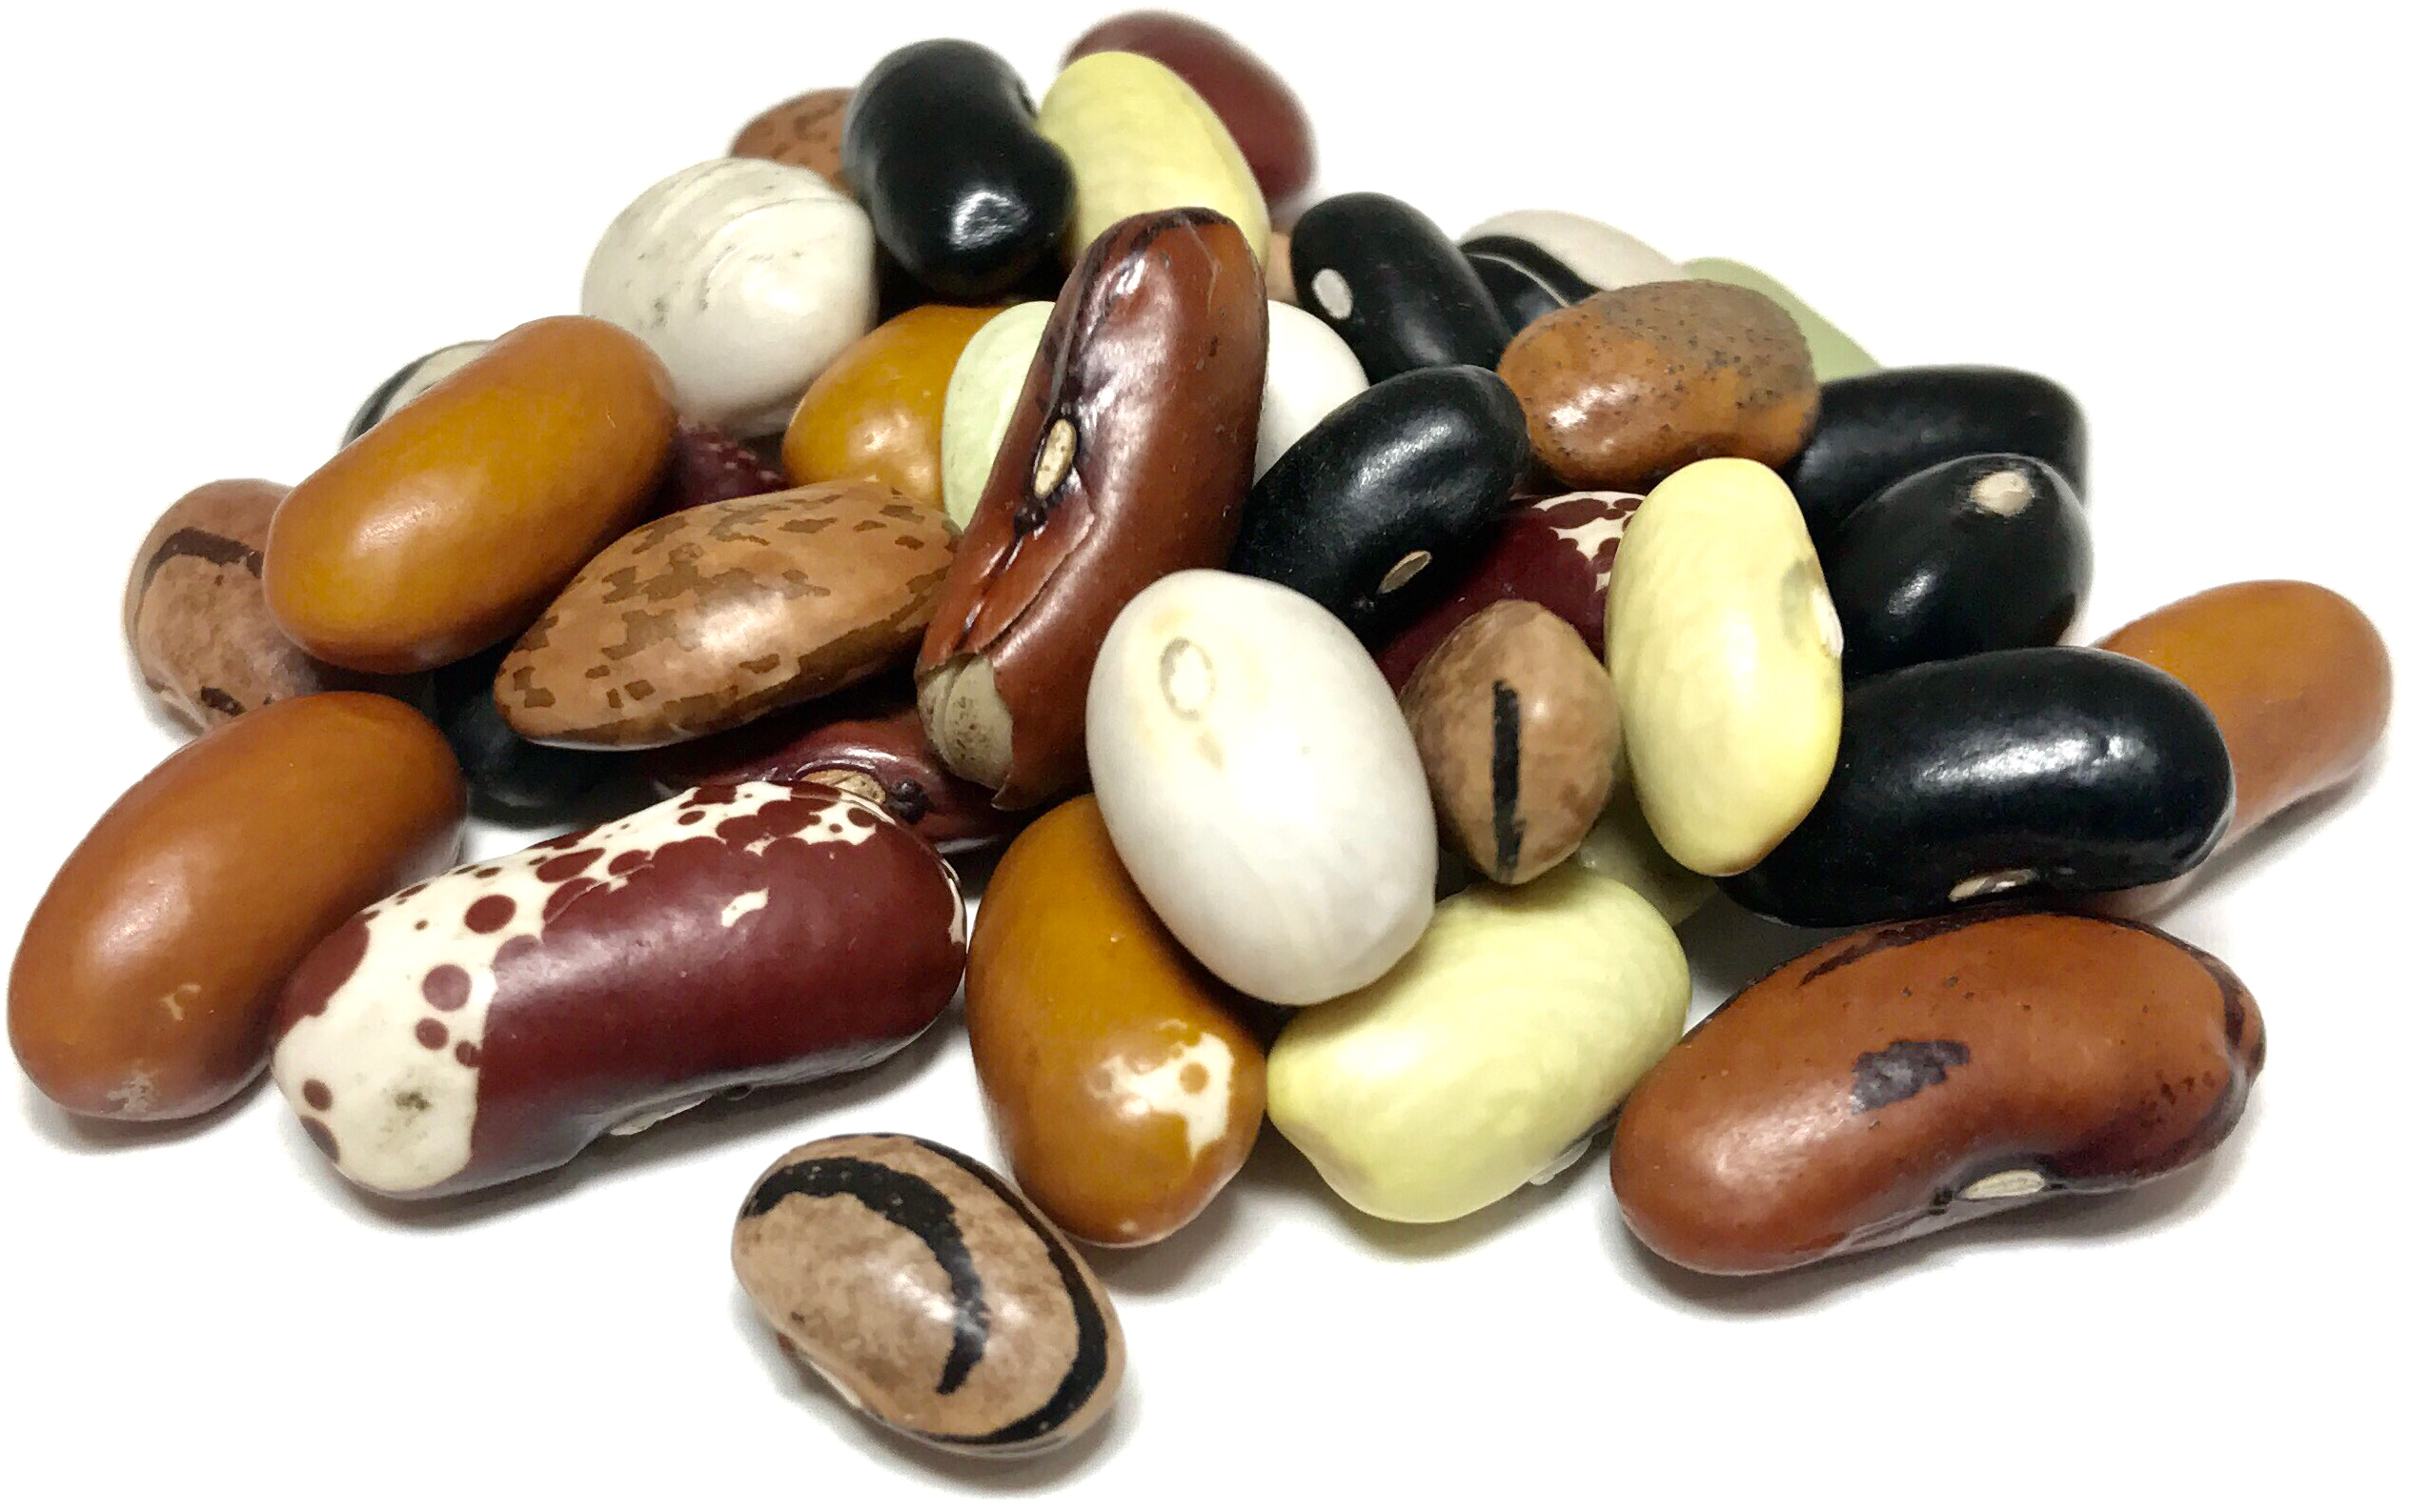 Mixed Beans Kidney HQ Image Free PNG Image